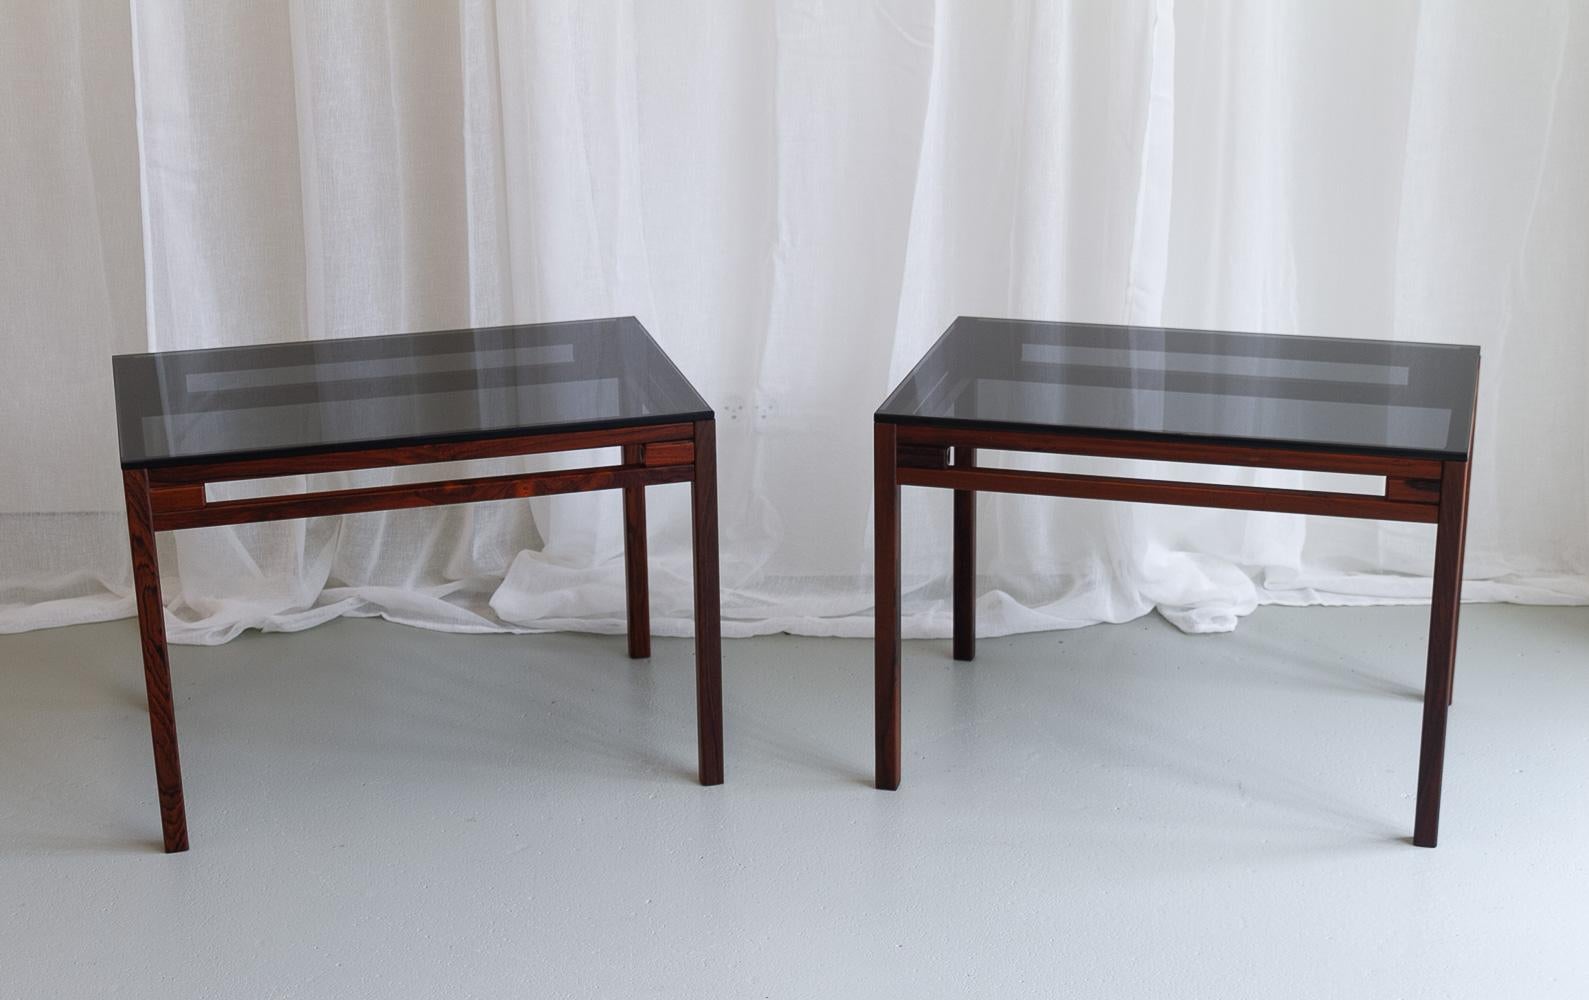 Danish Modern Side Tables in Rosewood and Glass, 1960s. Set of 2.
Elegant and stylish pair of Danish Mid-Century modern sidetables made in Denmark in the early 1960s. Frame in solid rosewood/palisander and table tops in smoked glass.
Suitable for